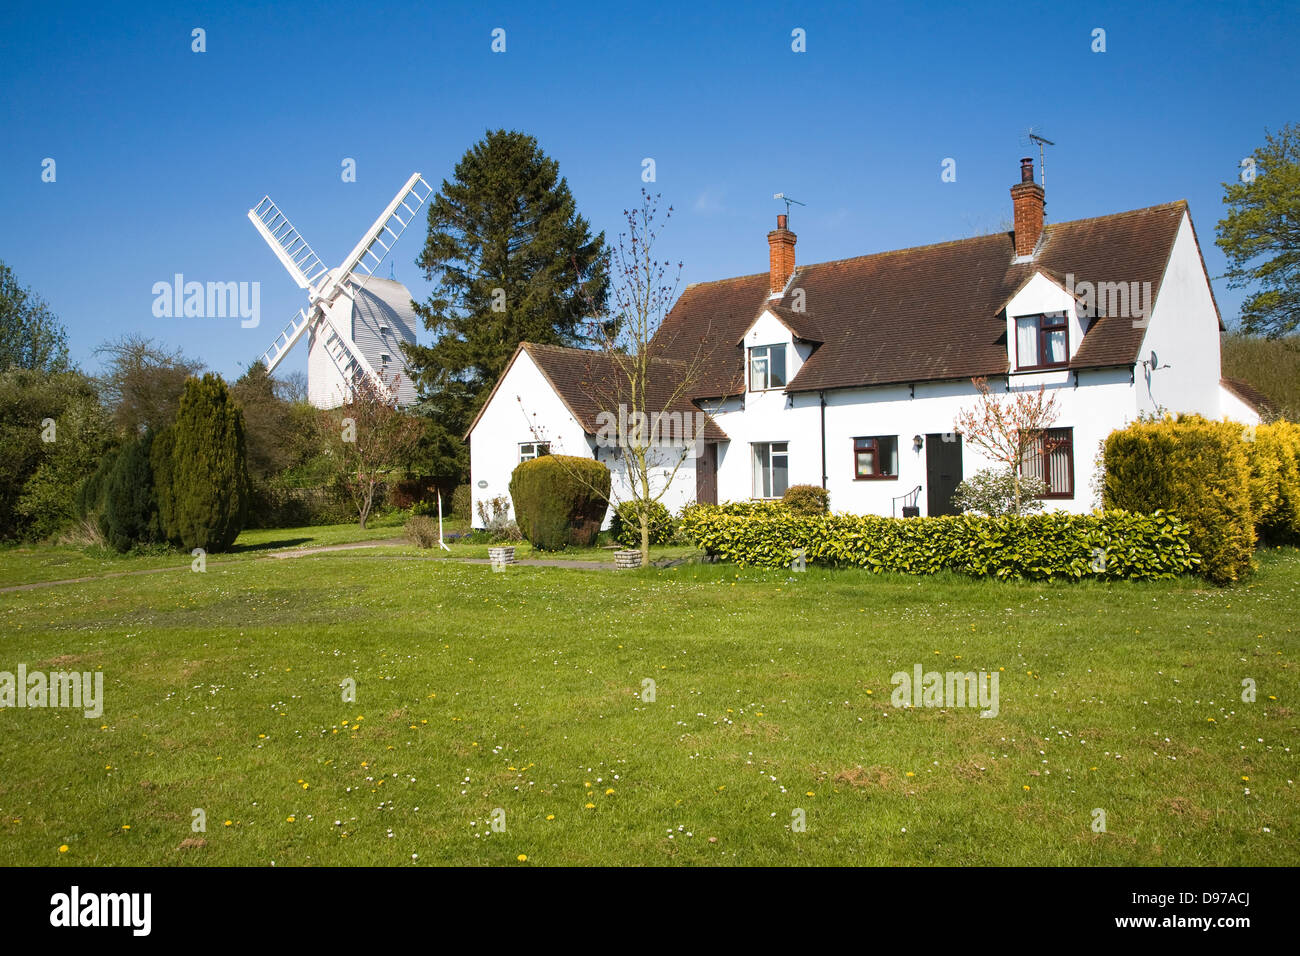 Housing and windmill in the attractive village of Finchingfield, Essex, England Stock Photo